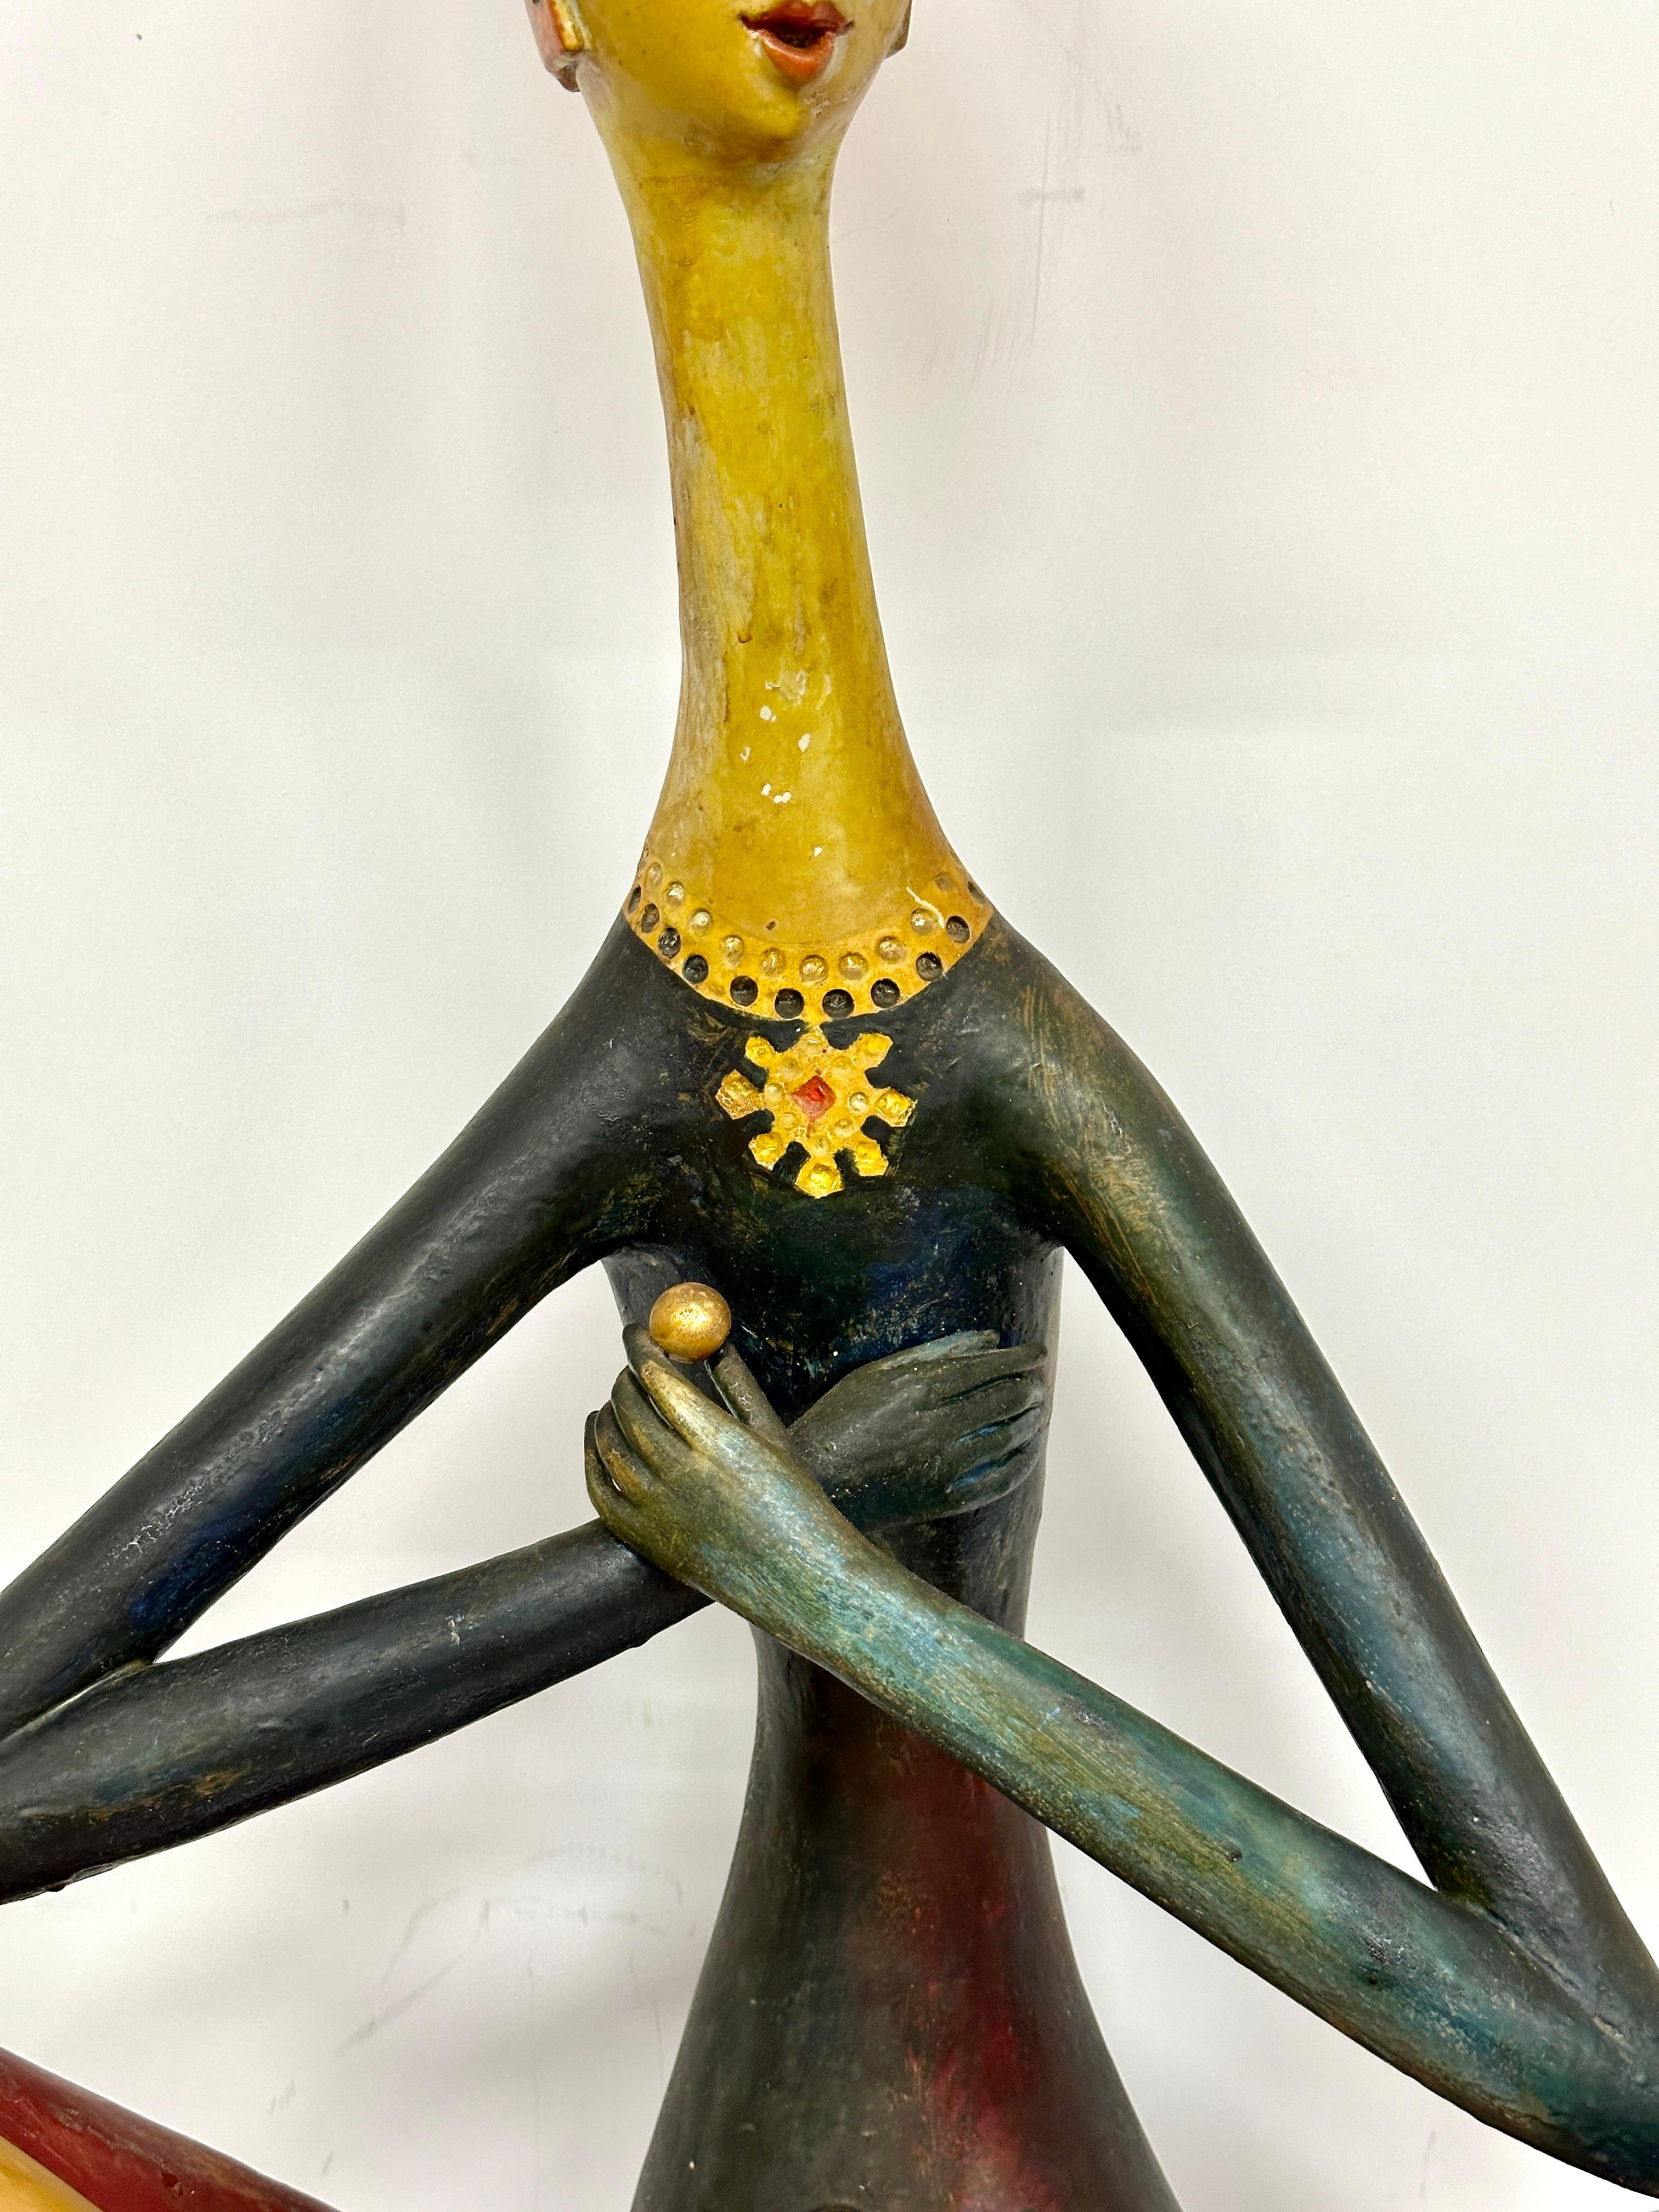 A wonderful whimsical massive pottery terracotta sculpture from 1962, signed Selbmann Roma, Italy. 
The piece just conveys joy and happiness. Muted colors. The piece has an old repair to one leg, and appears to have been repainted on the legs. There